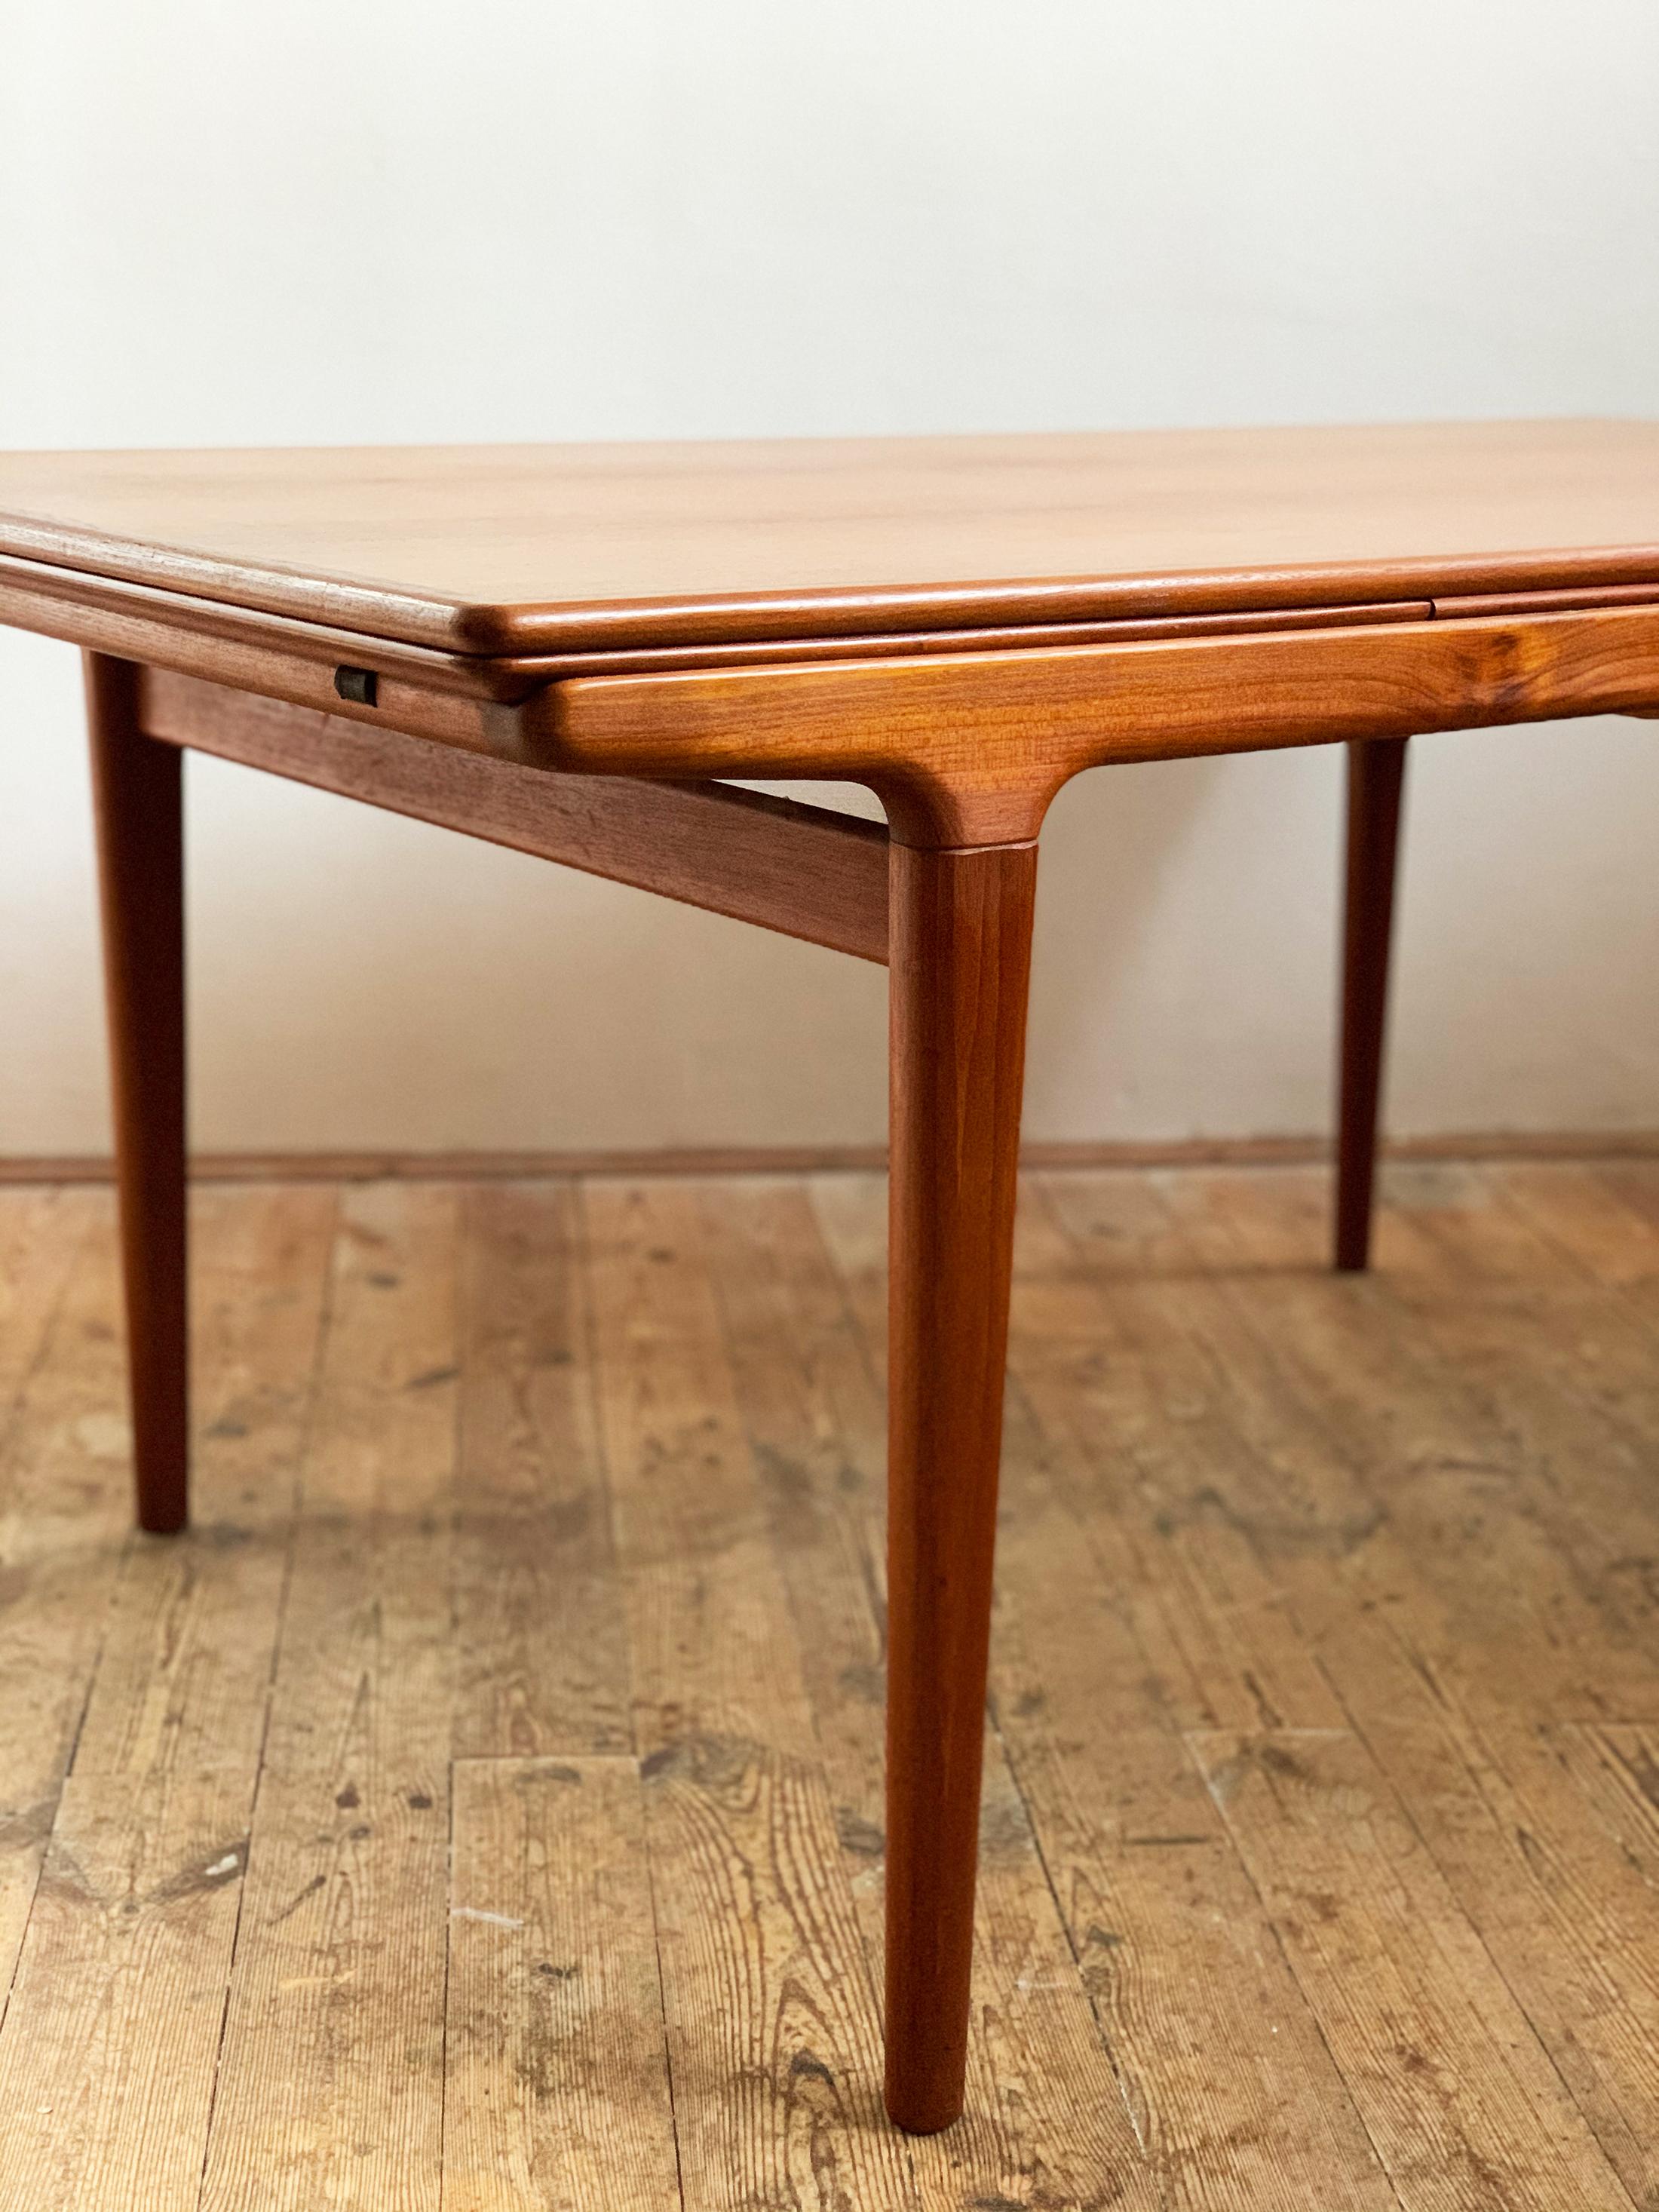 Extendable Midcentury Teak Dining Table by Johannes Andersen for Uldum In Good Condition For Sale In Munich, Bavaria